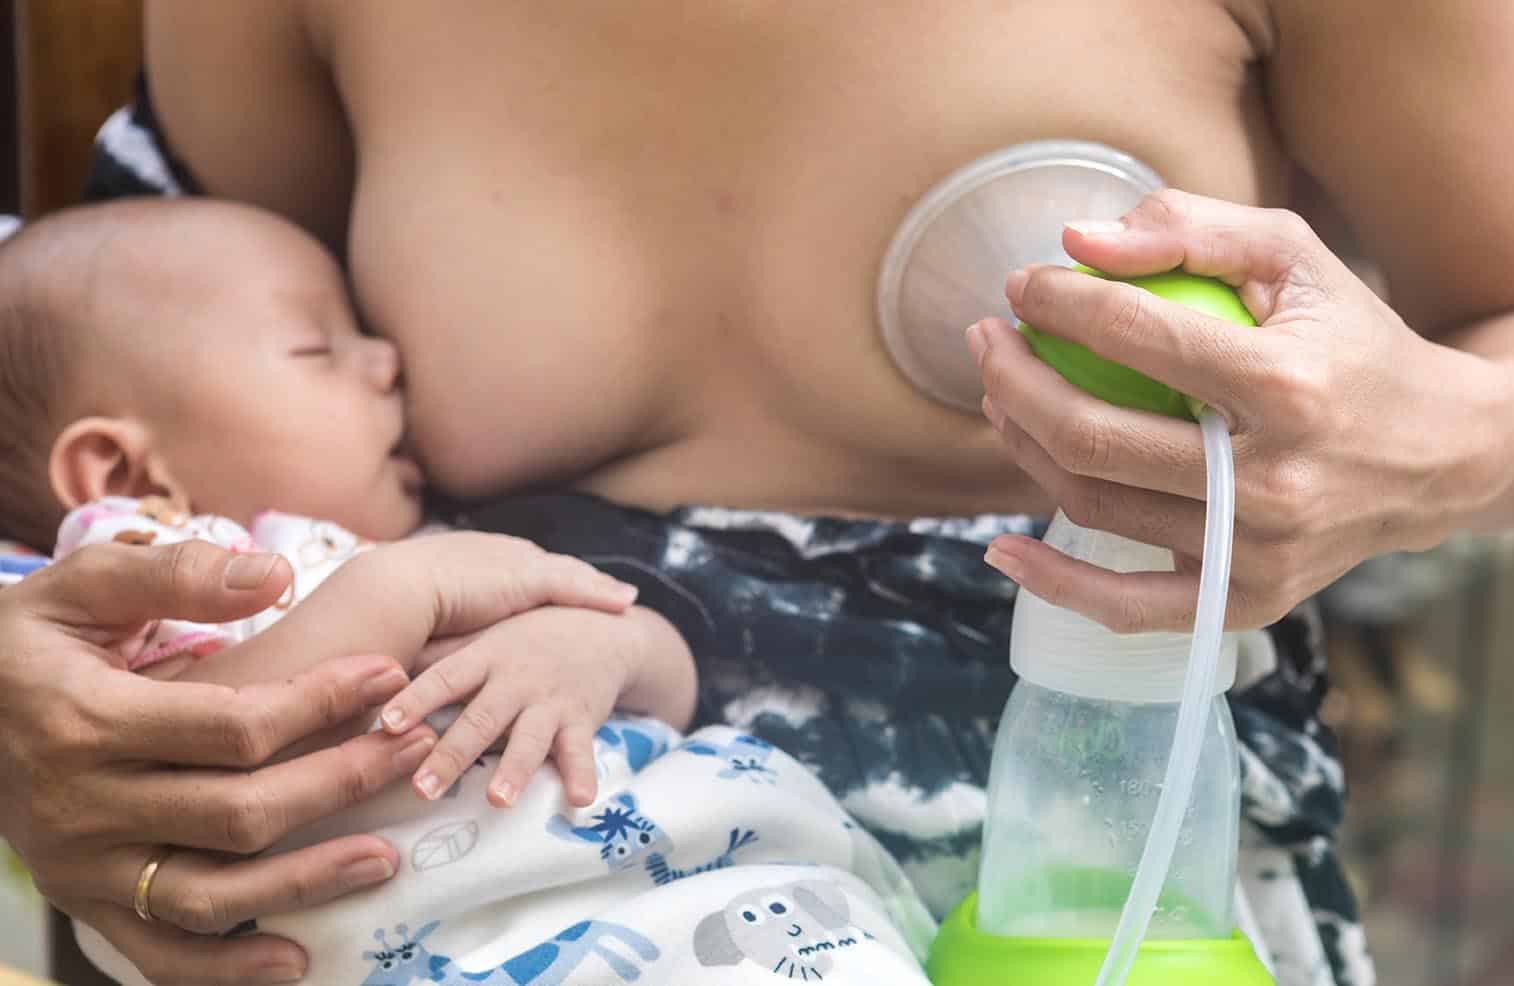 Whether you're pumping exclusively, pumping to build a stash or pumping for any other reason, there's certainly a knack to getting things going. Here are some tips to help you express more breastmilk to help you get the most out of your pumping session.